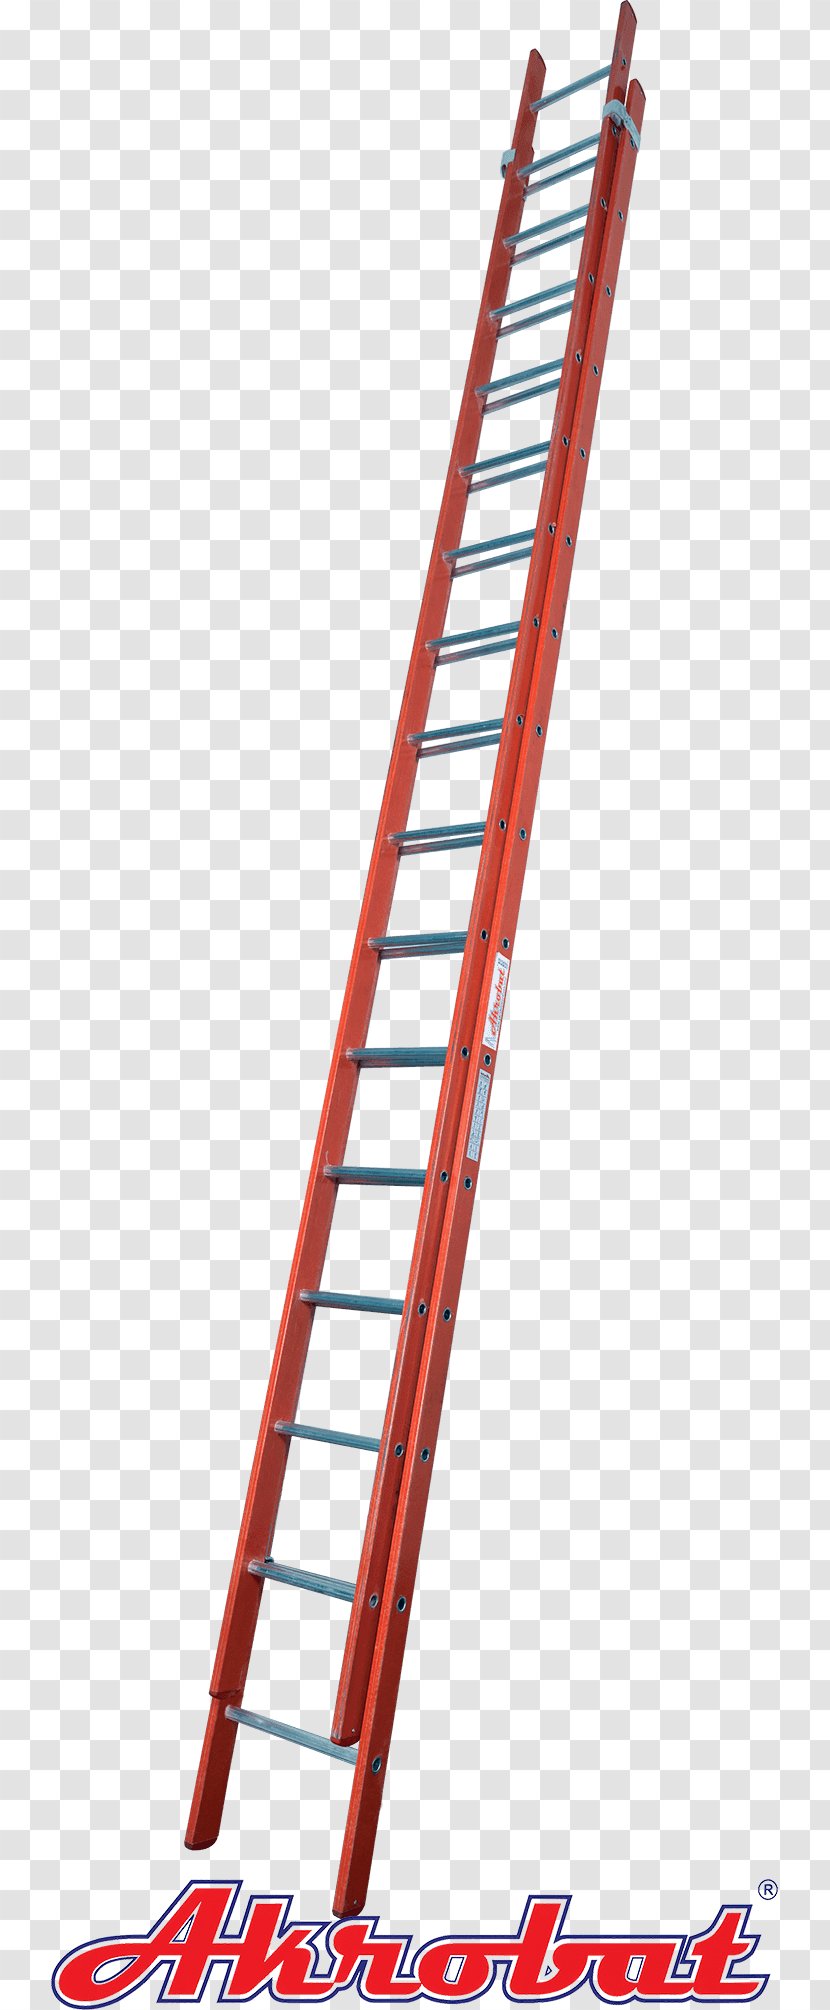 Attic Ladder Stairs Scaffolding Altrex - Ladders Transparent PNG